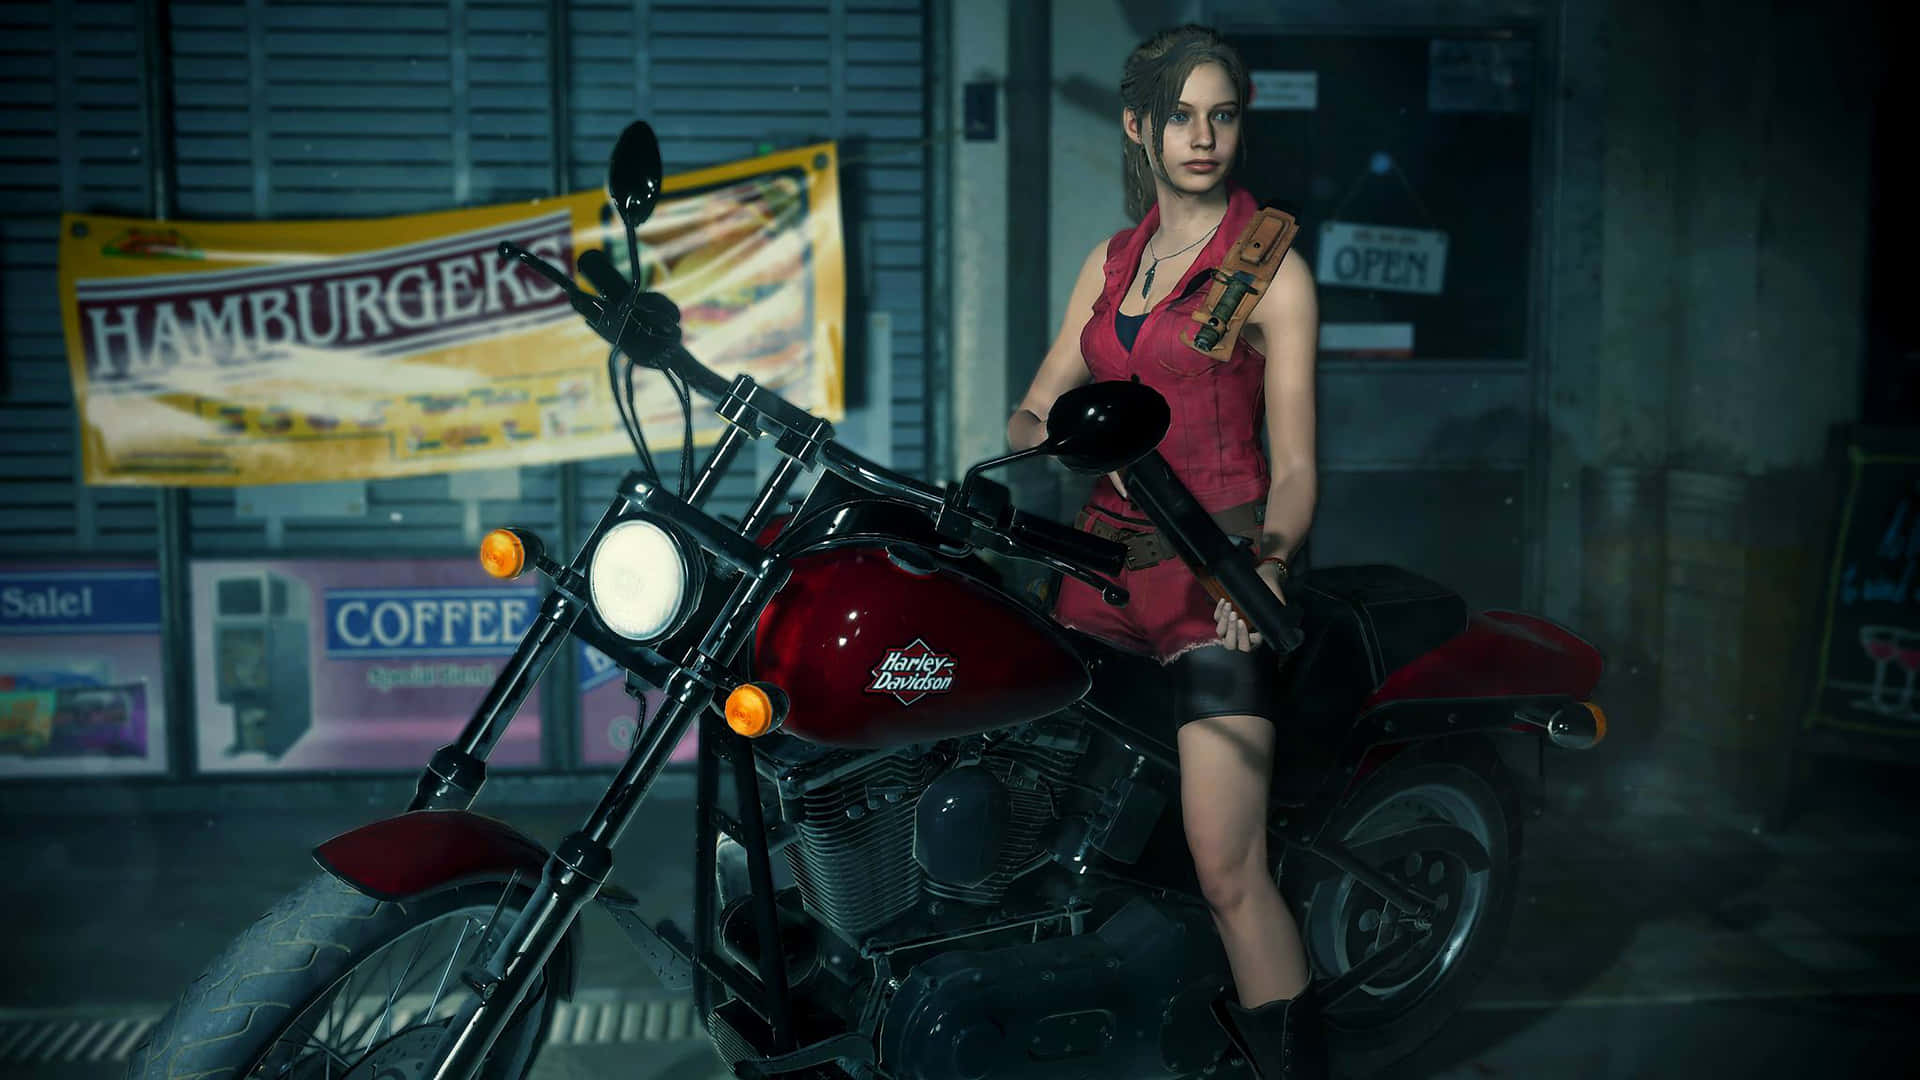 Resident Evil 2 Claire Redfield On A Motorbike Wallpaper